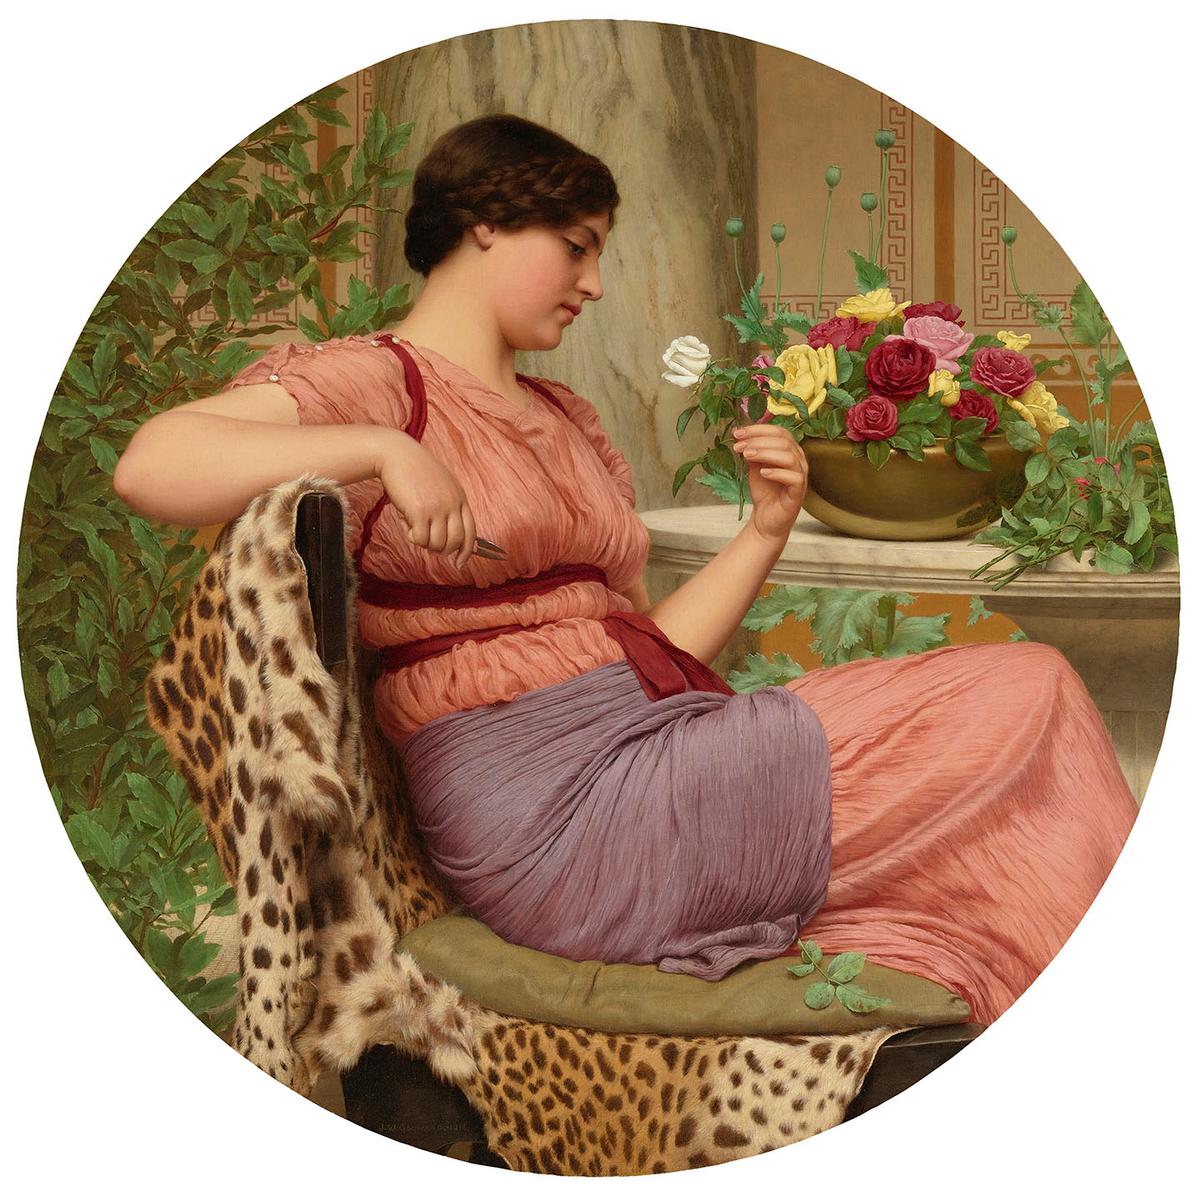 In "Romeo and Juliet," Juliet poses the question: If a rose was called by another name, would it still have its trait: a sweet smell? "The Time of Roses," 1916, by John William Godward. Oil on canvas. Private collection. (Public Domain)